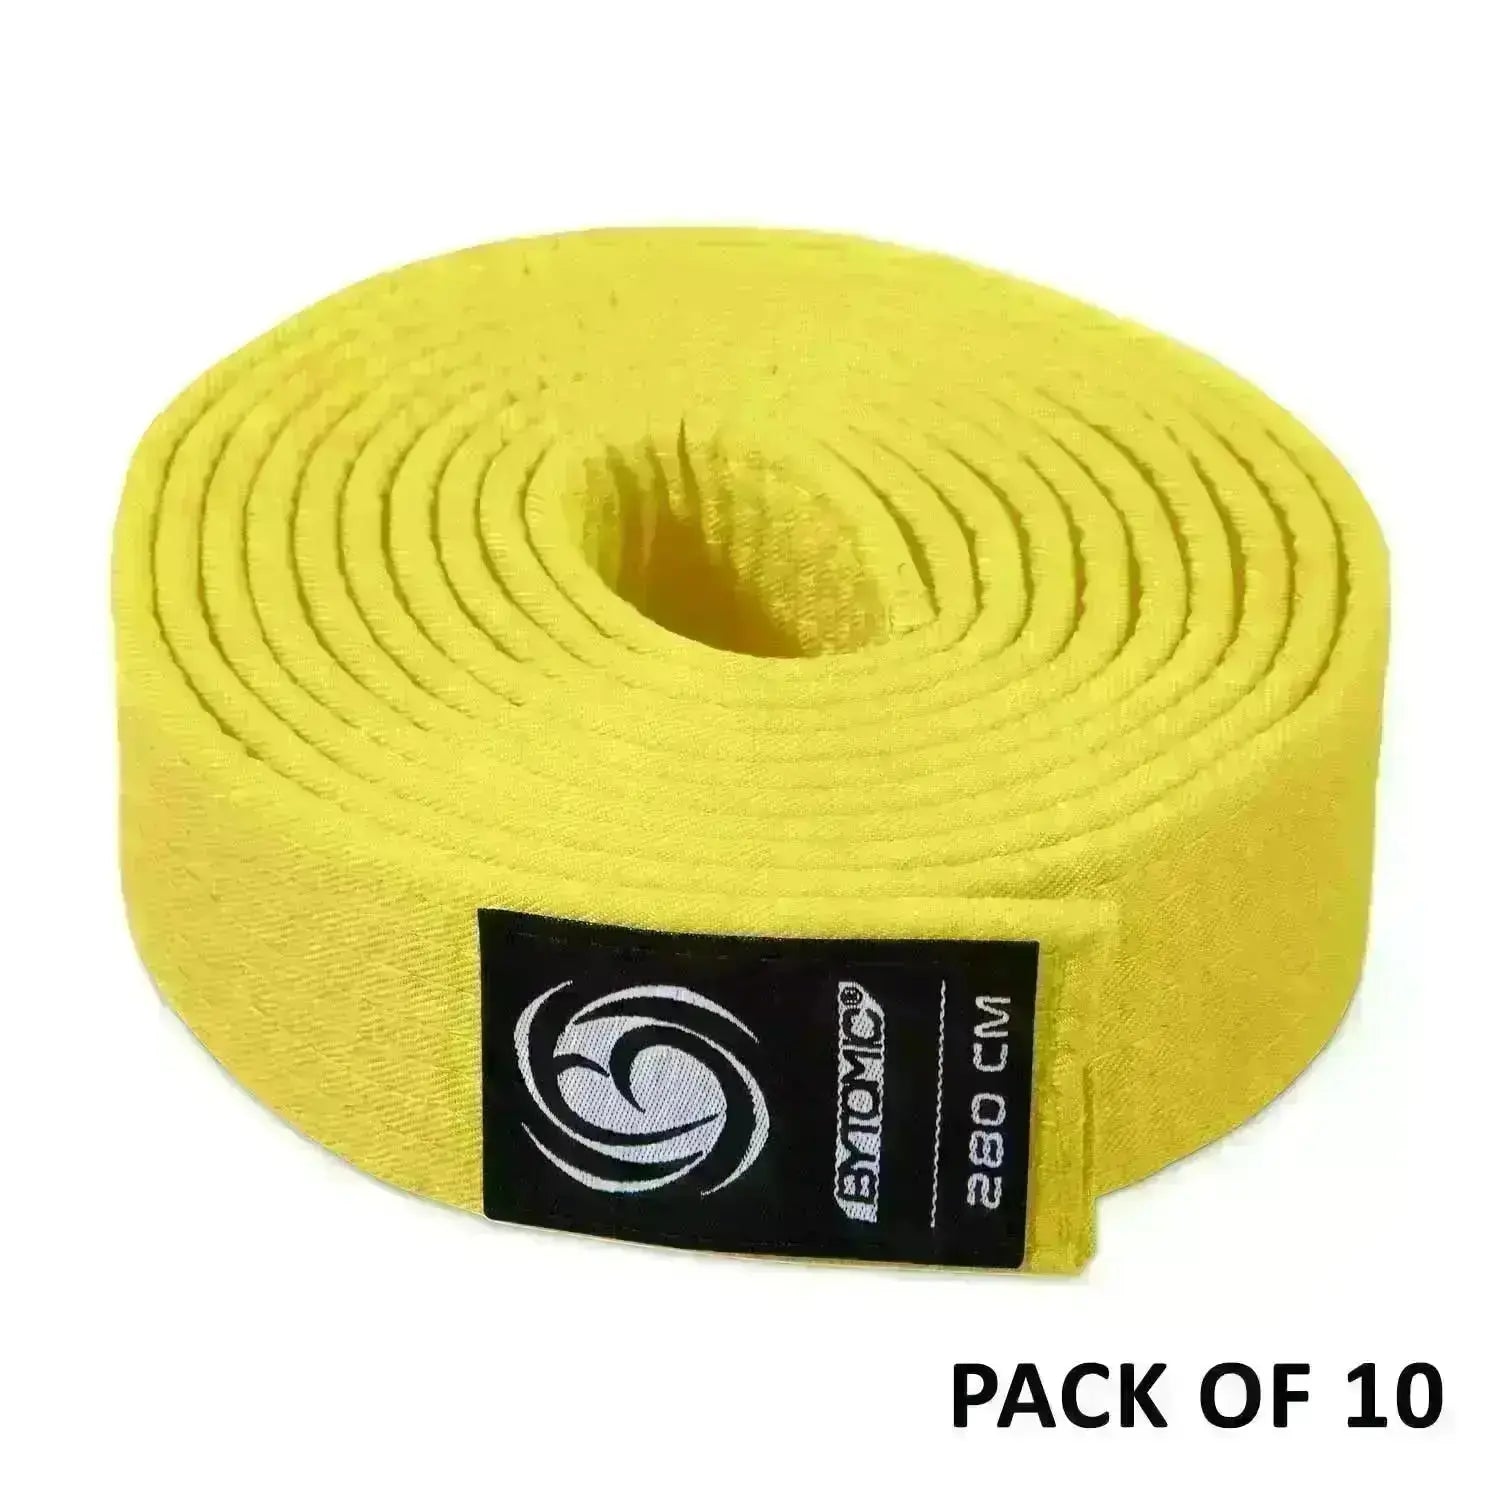 Bytomic Plain Polycotton Martial Arts Belt Pack of 10 Yellow-280cm Fight Co